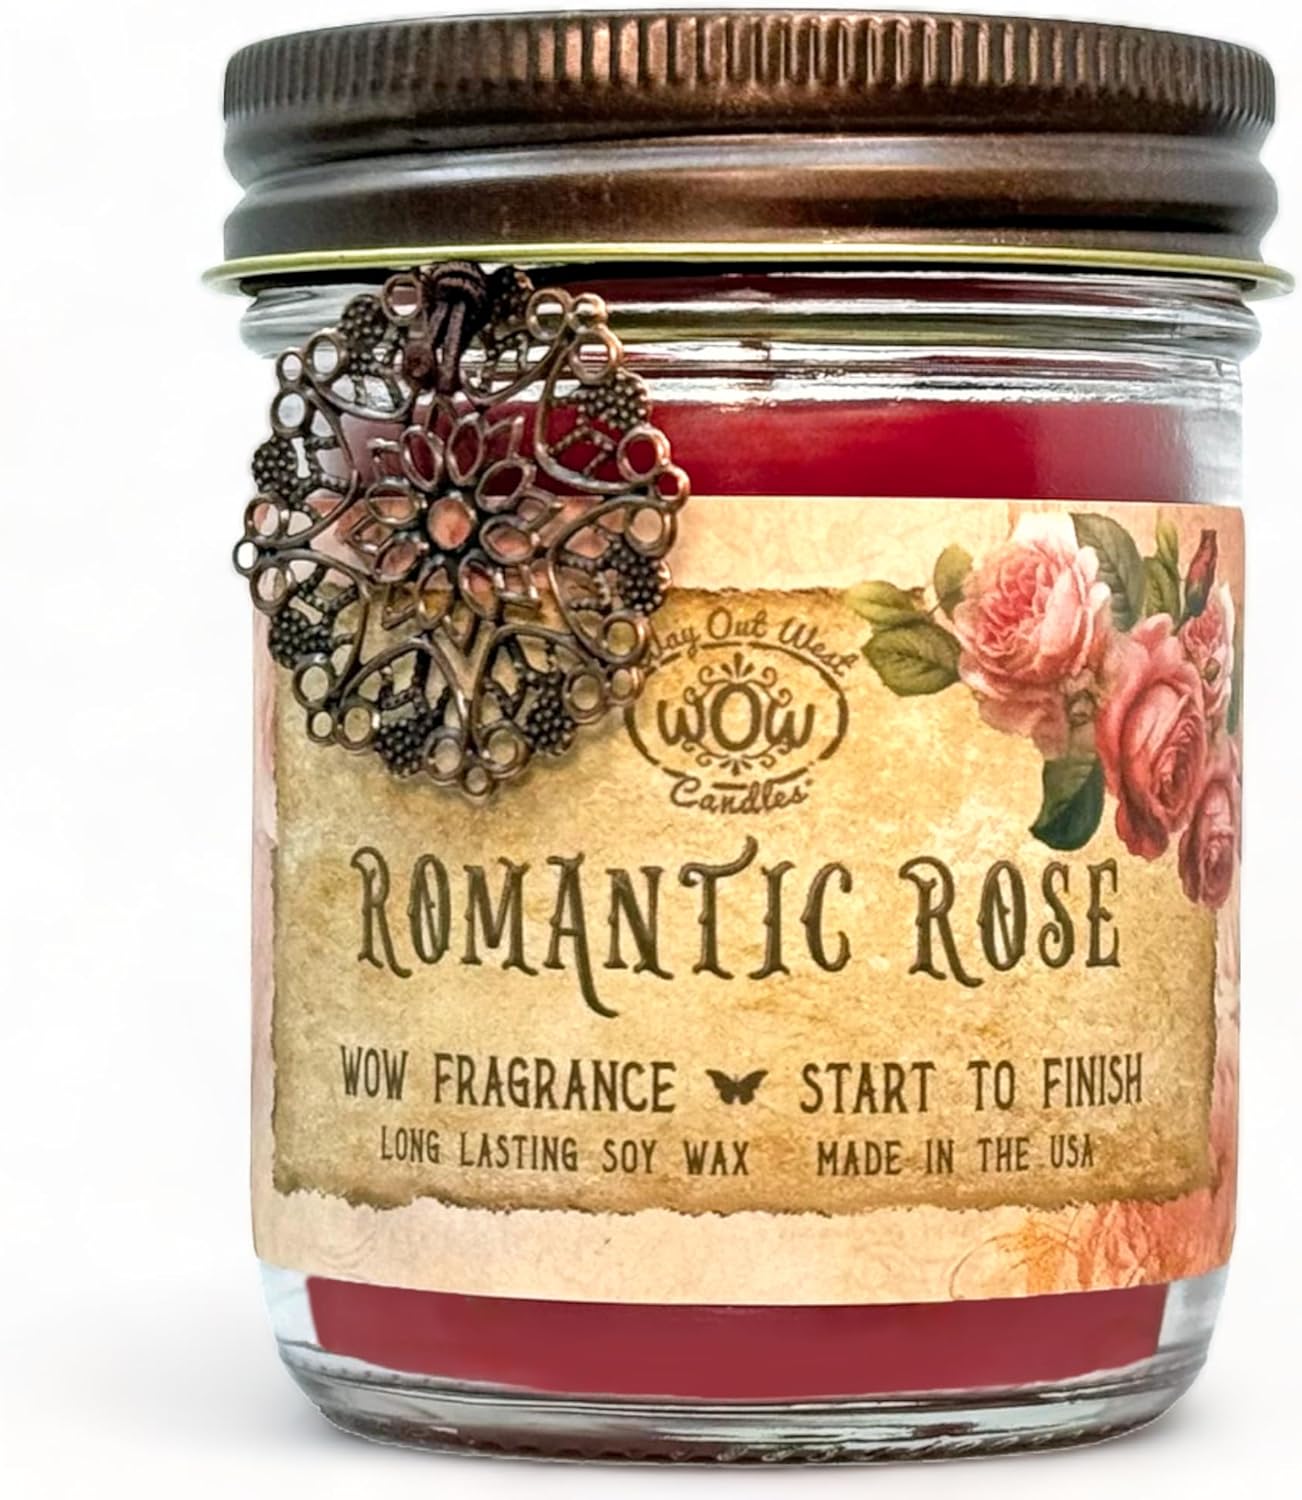 Scented Candle for Home - Long Lasting Home Fragrance or Essential Oils - Small Candles Gifts for Women - Natural Soy Candles - Made in USA - Romantic Rose